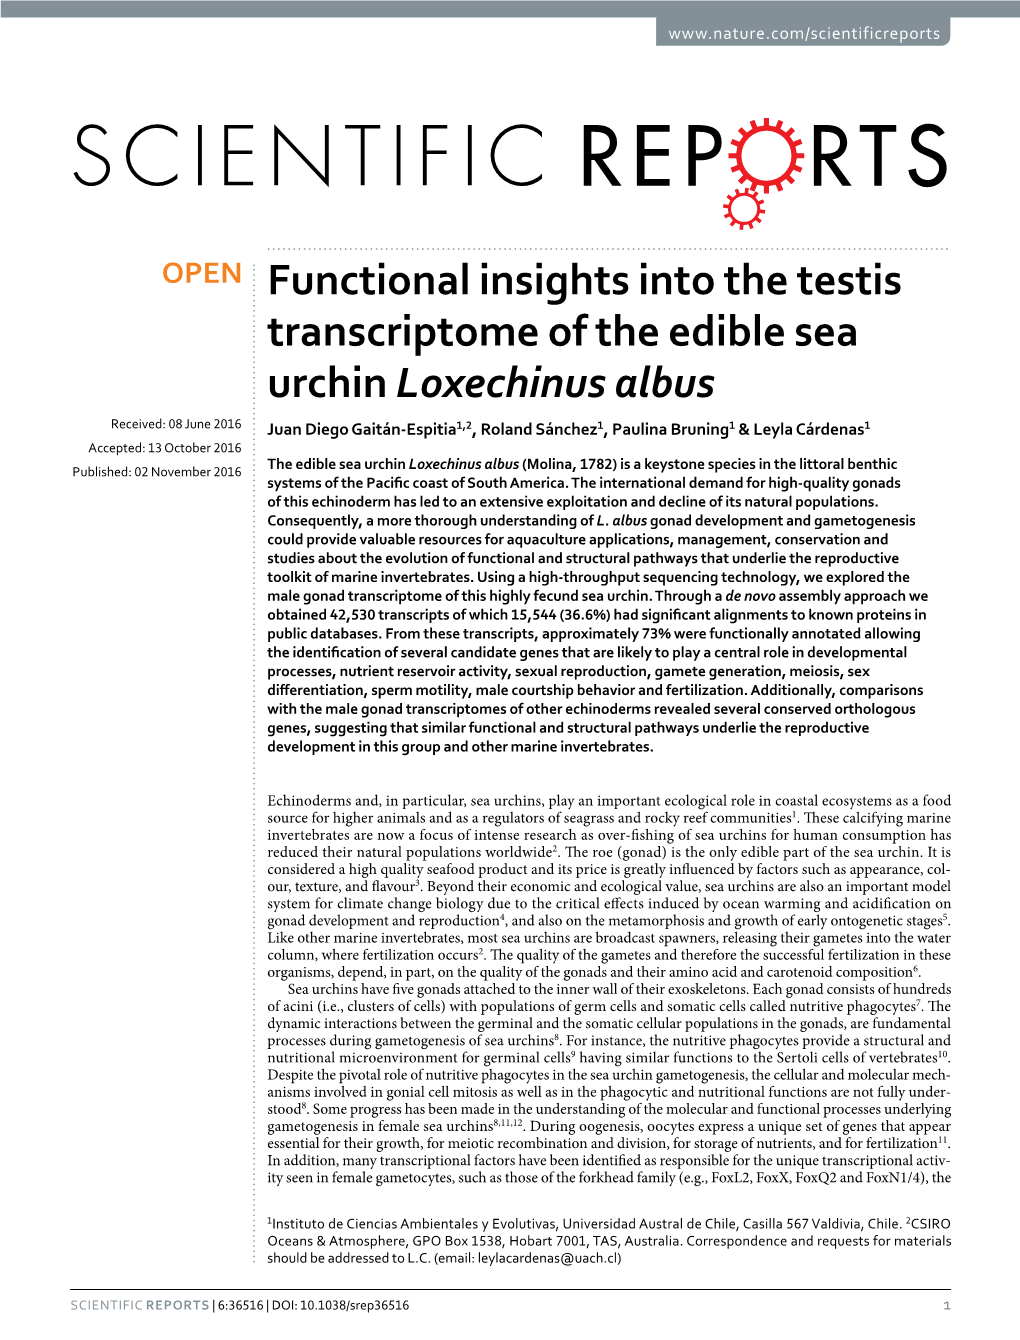 Functional Insights Into the Testis Transcriptome of the Edible Sea